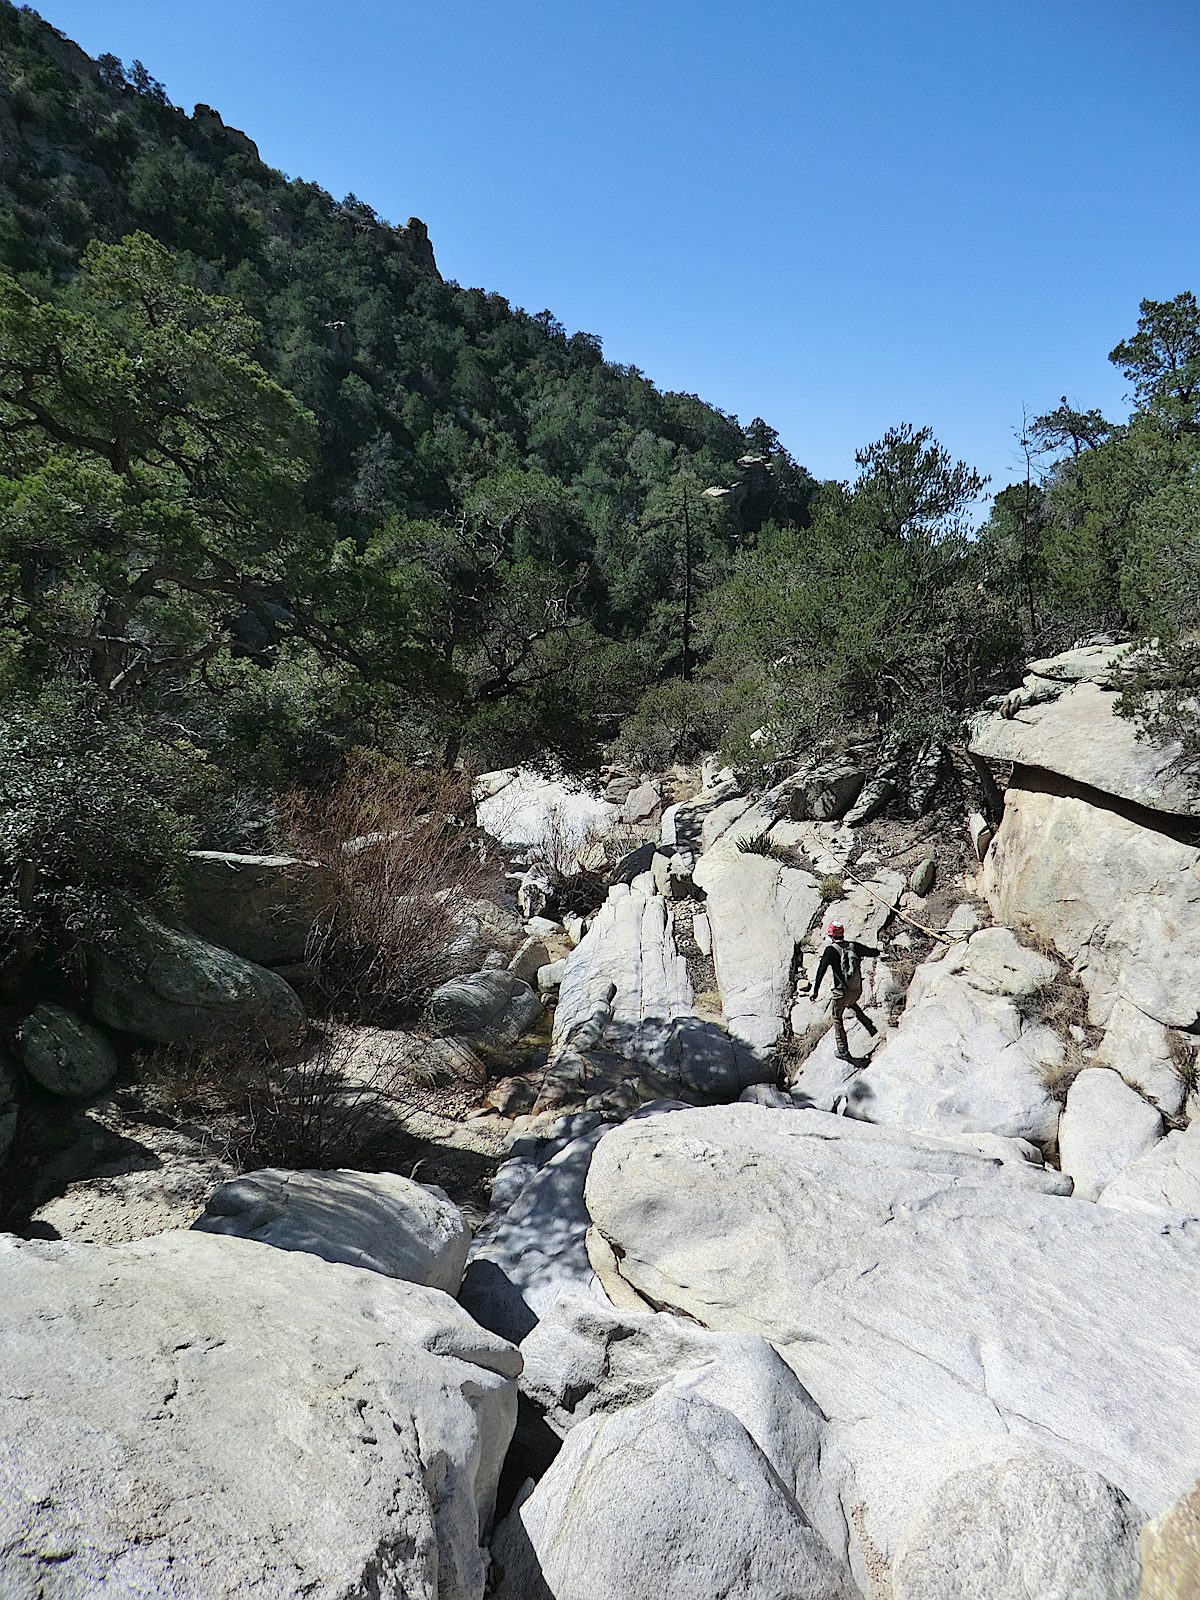 Headed down the rugged West Fork of Molino. March 2012